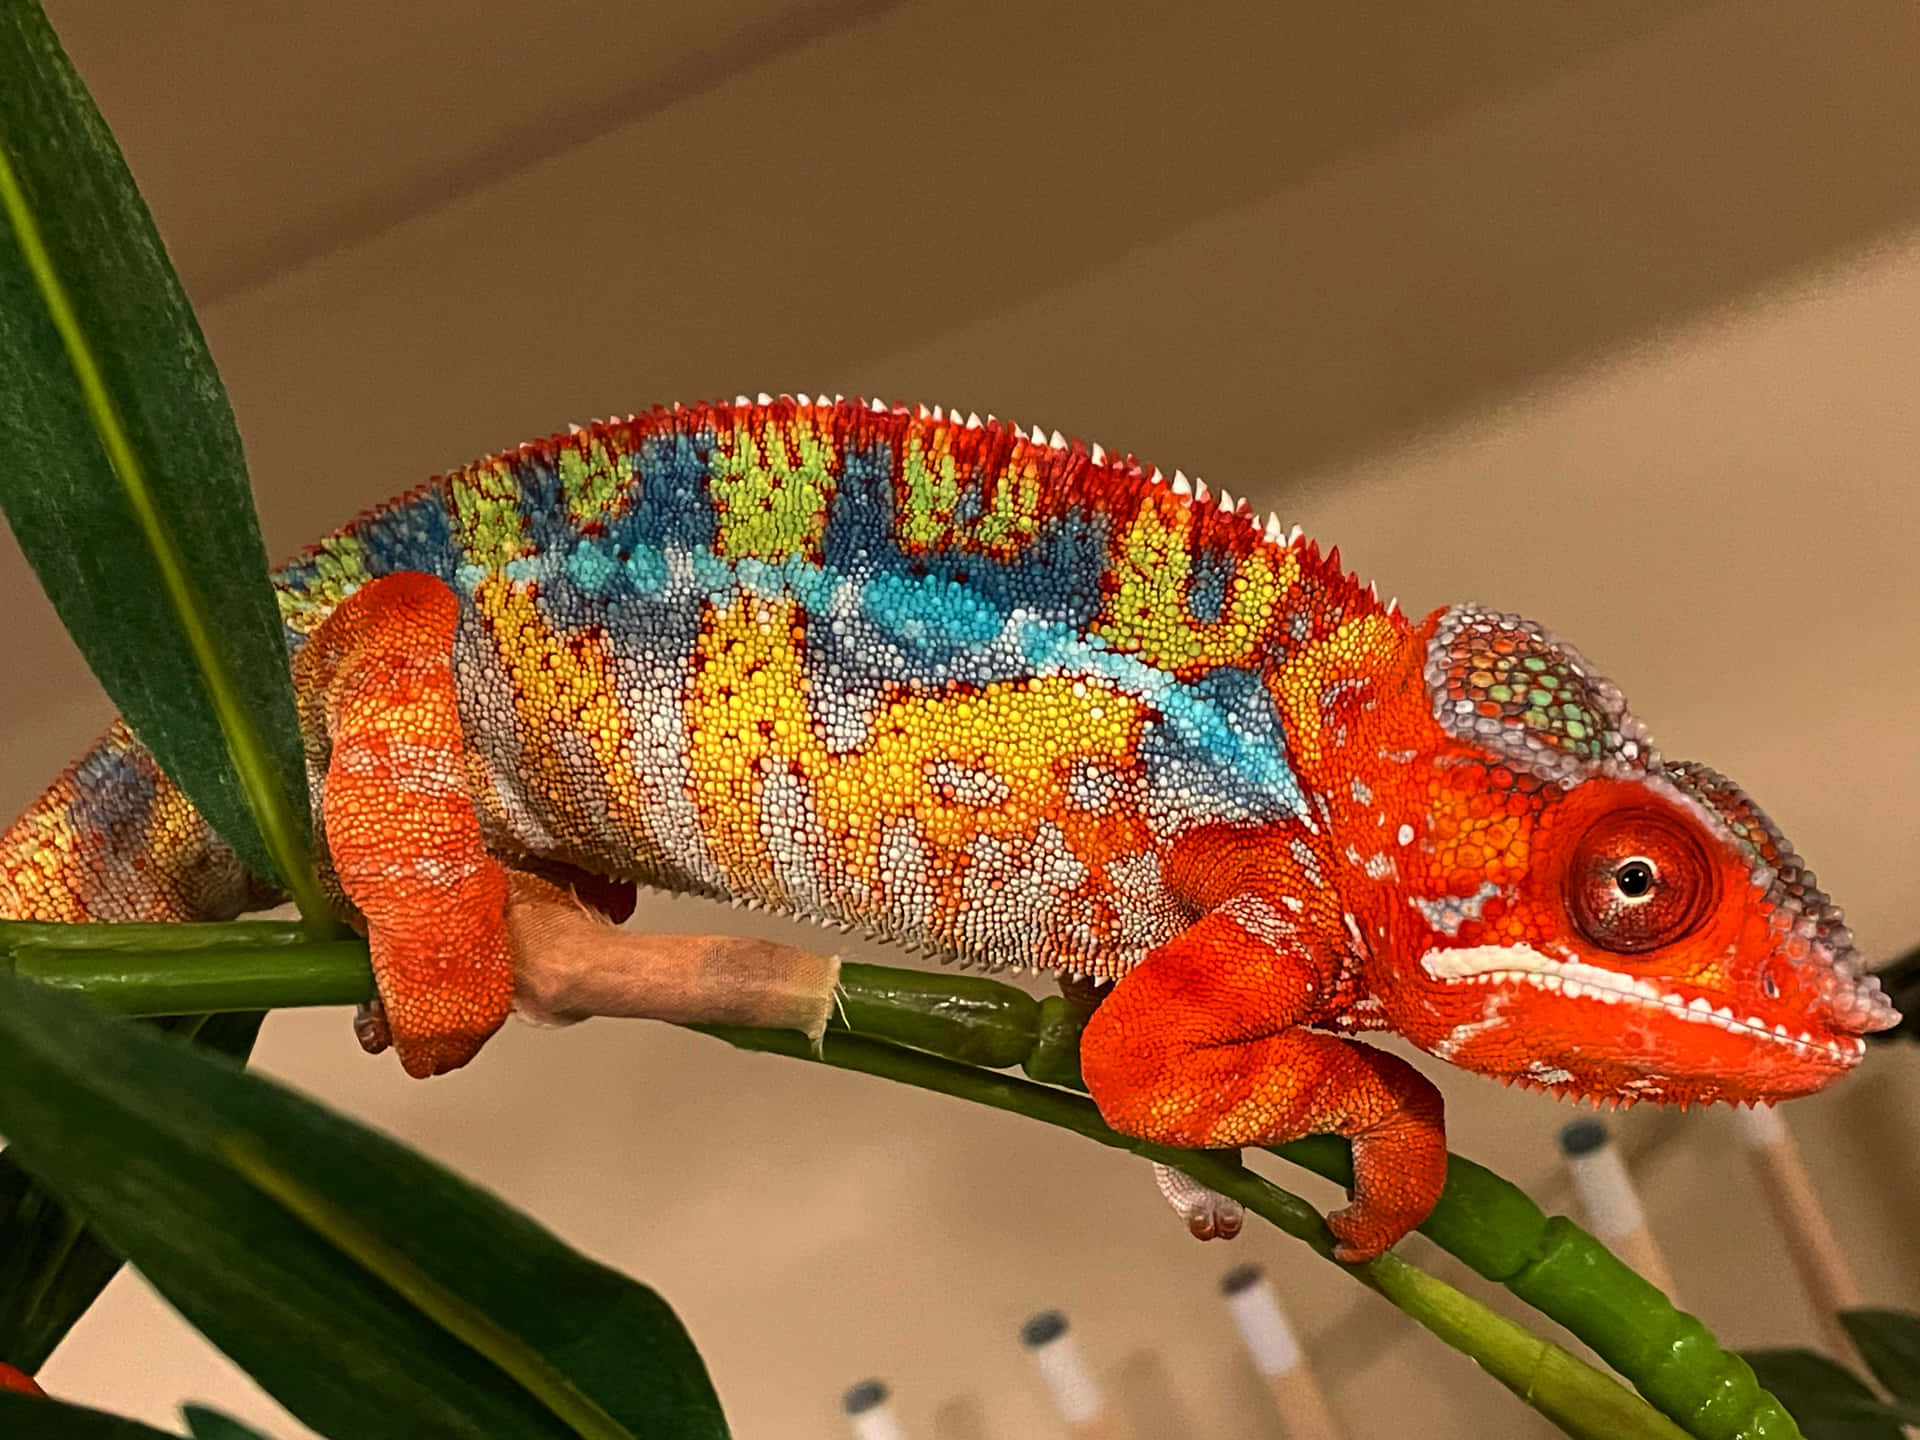 A vibrant chameleon perched on a branch